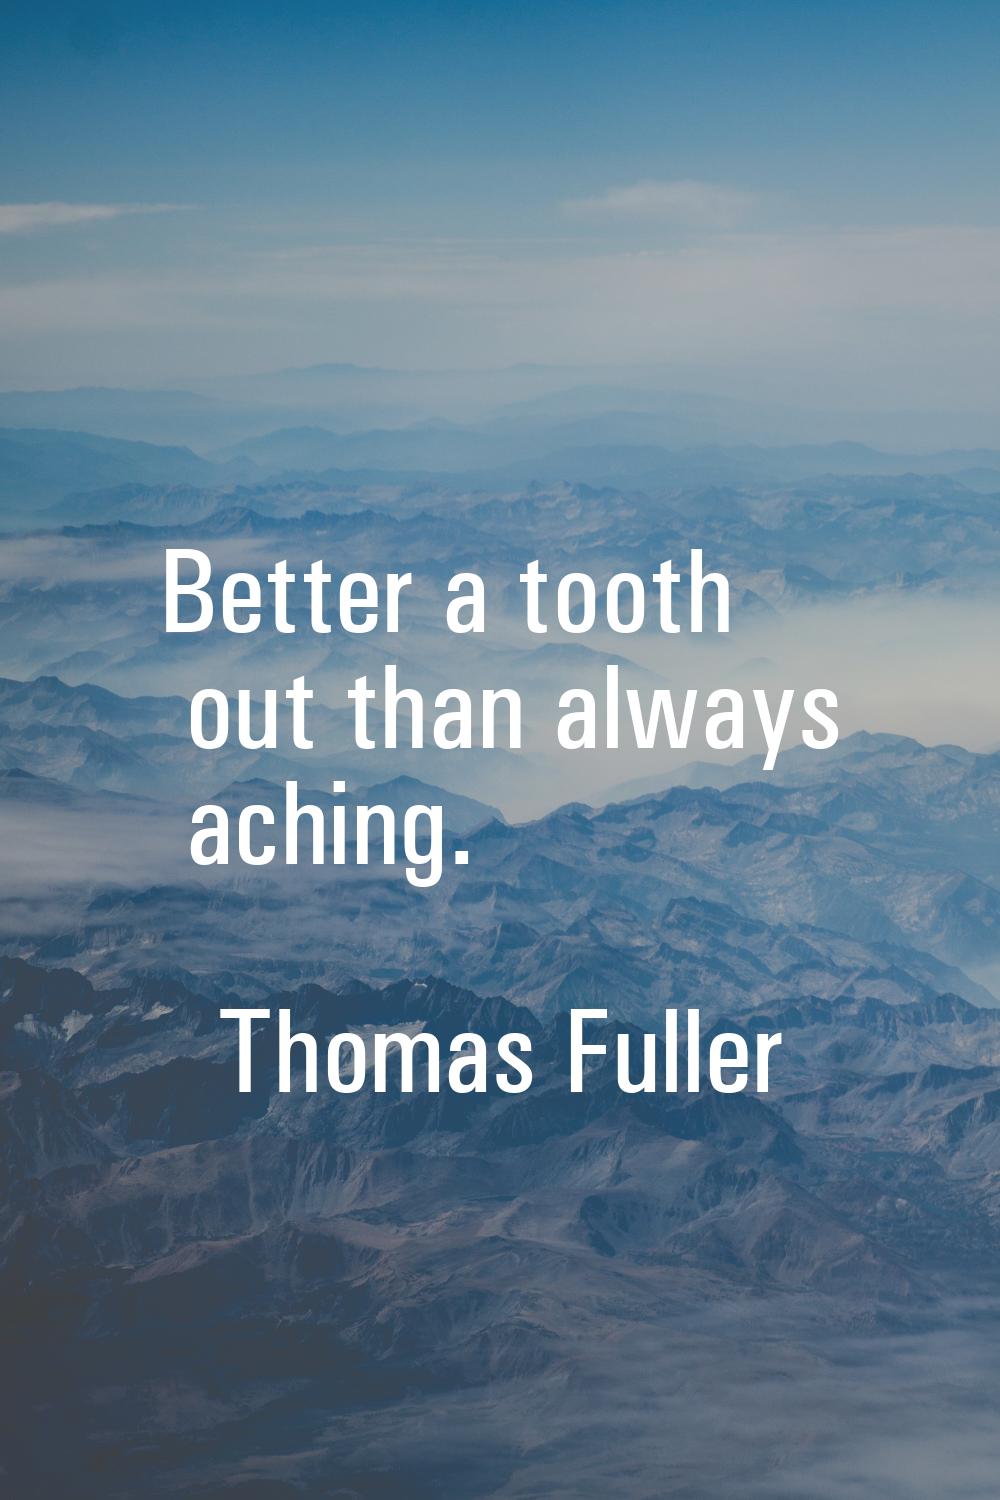 Better a tooth out than always aching.